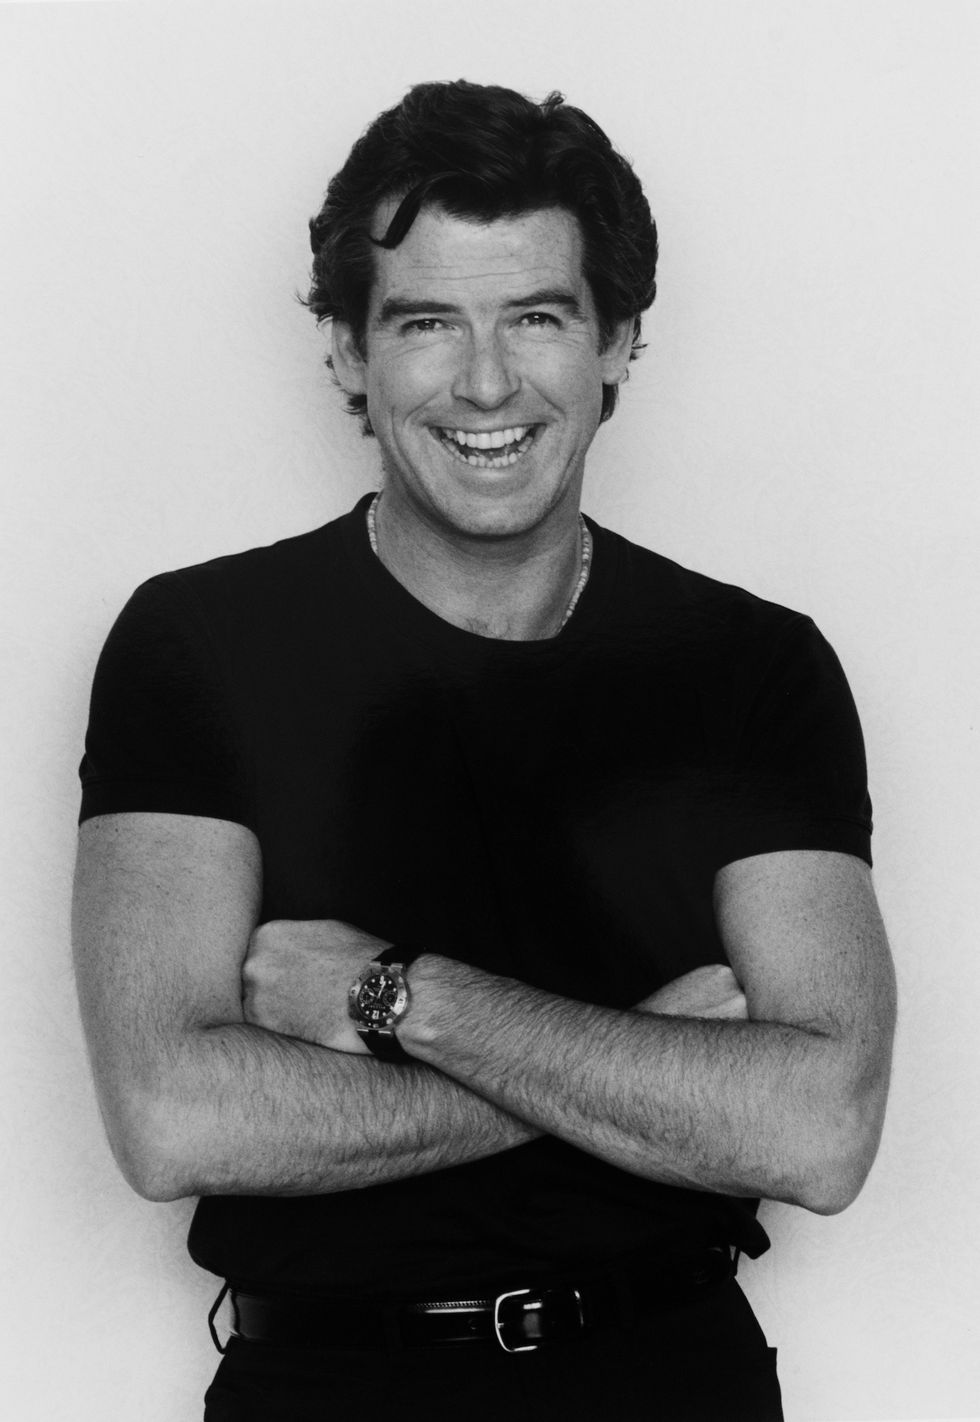 actor pierce brosnan, starring in the film 'tomorrow never dies' as james bond, poses for a photoshoot in germany, 1997 photo by dave hoganhulton archivegetty images